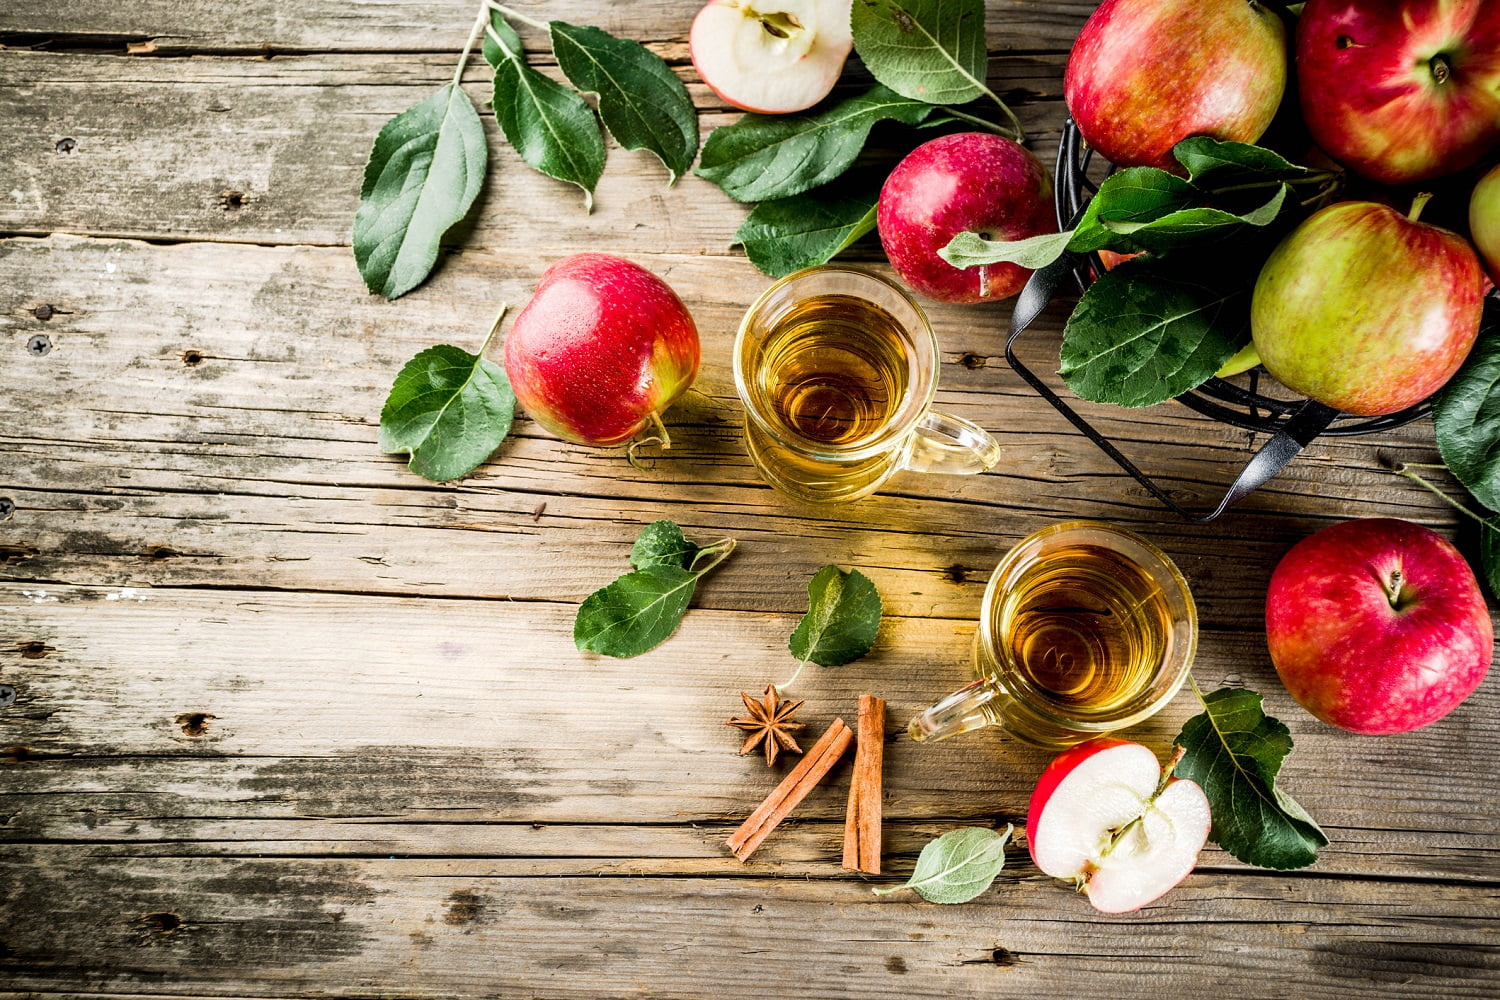 Island Orchard Cider has the freshest, most crisp cider in Door County